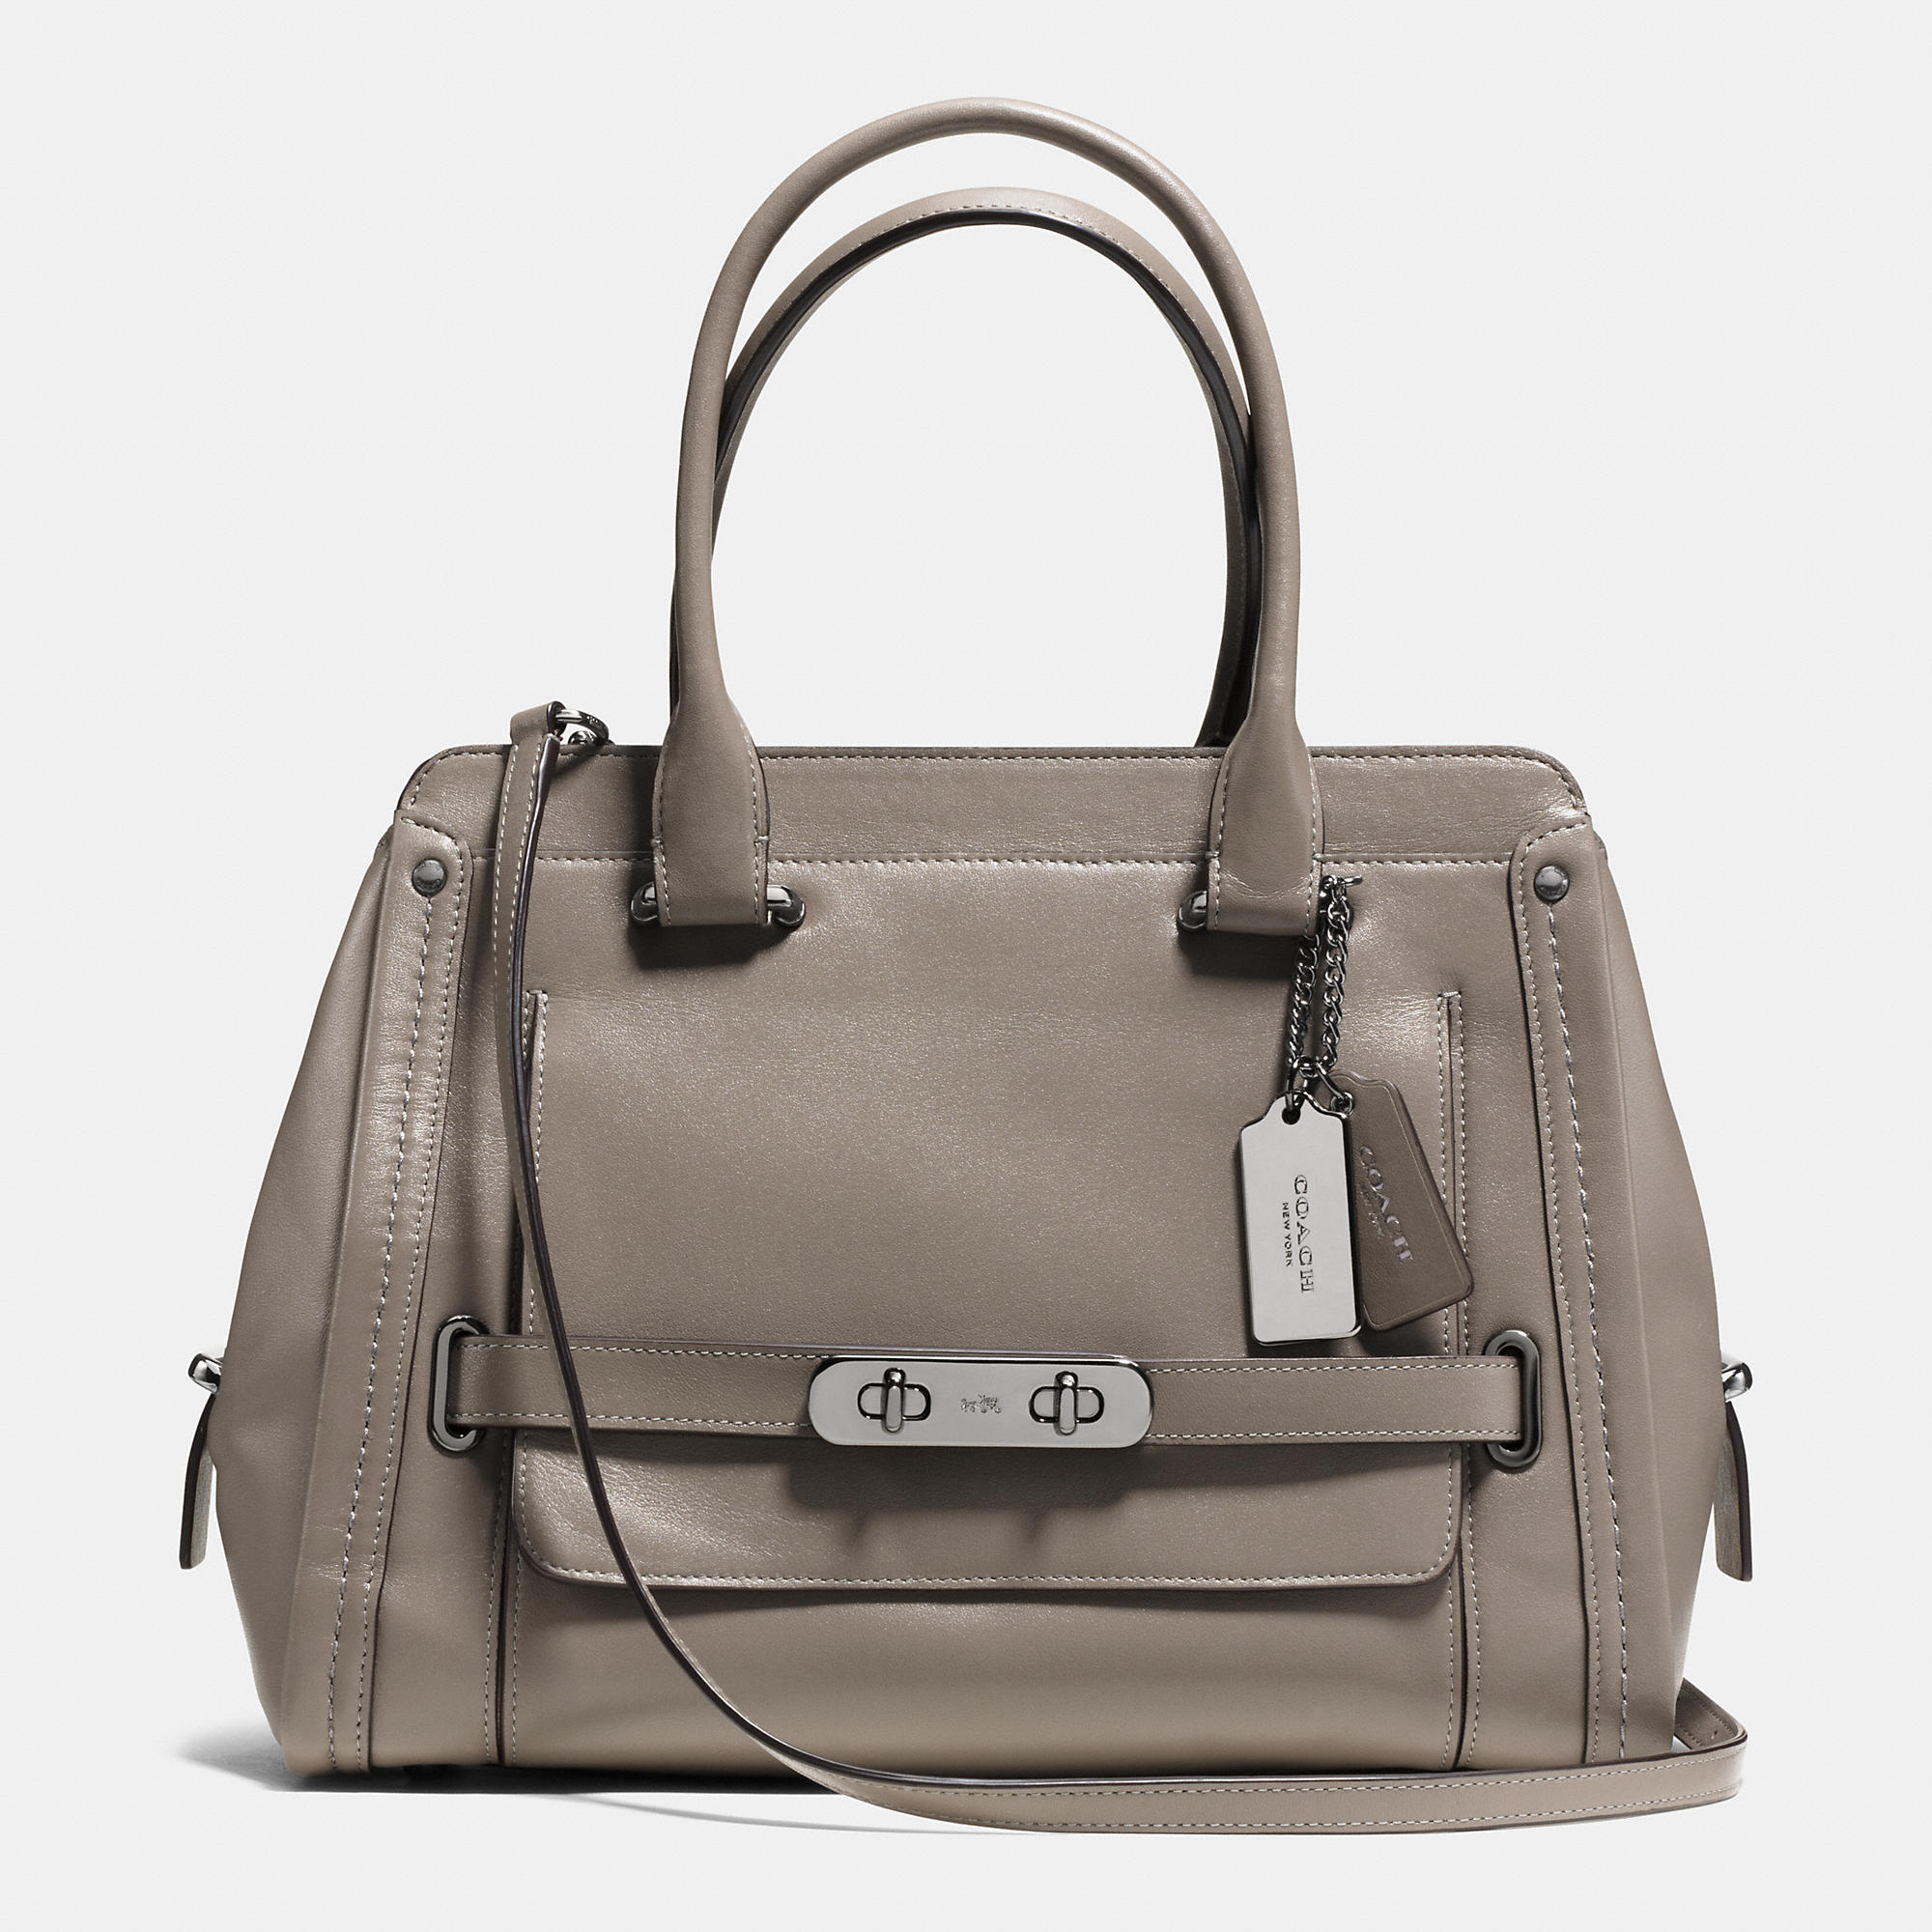 New Leather Coach Swagger Frame Satchel In Calf Leather | Coach Outlet Canada